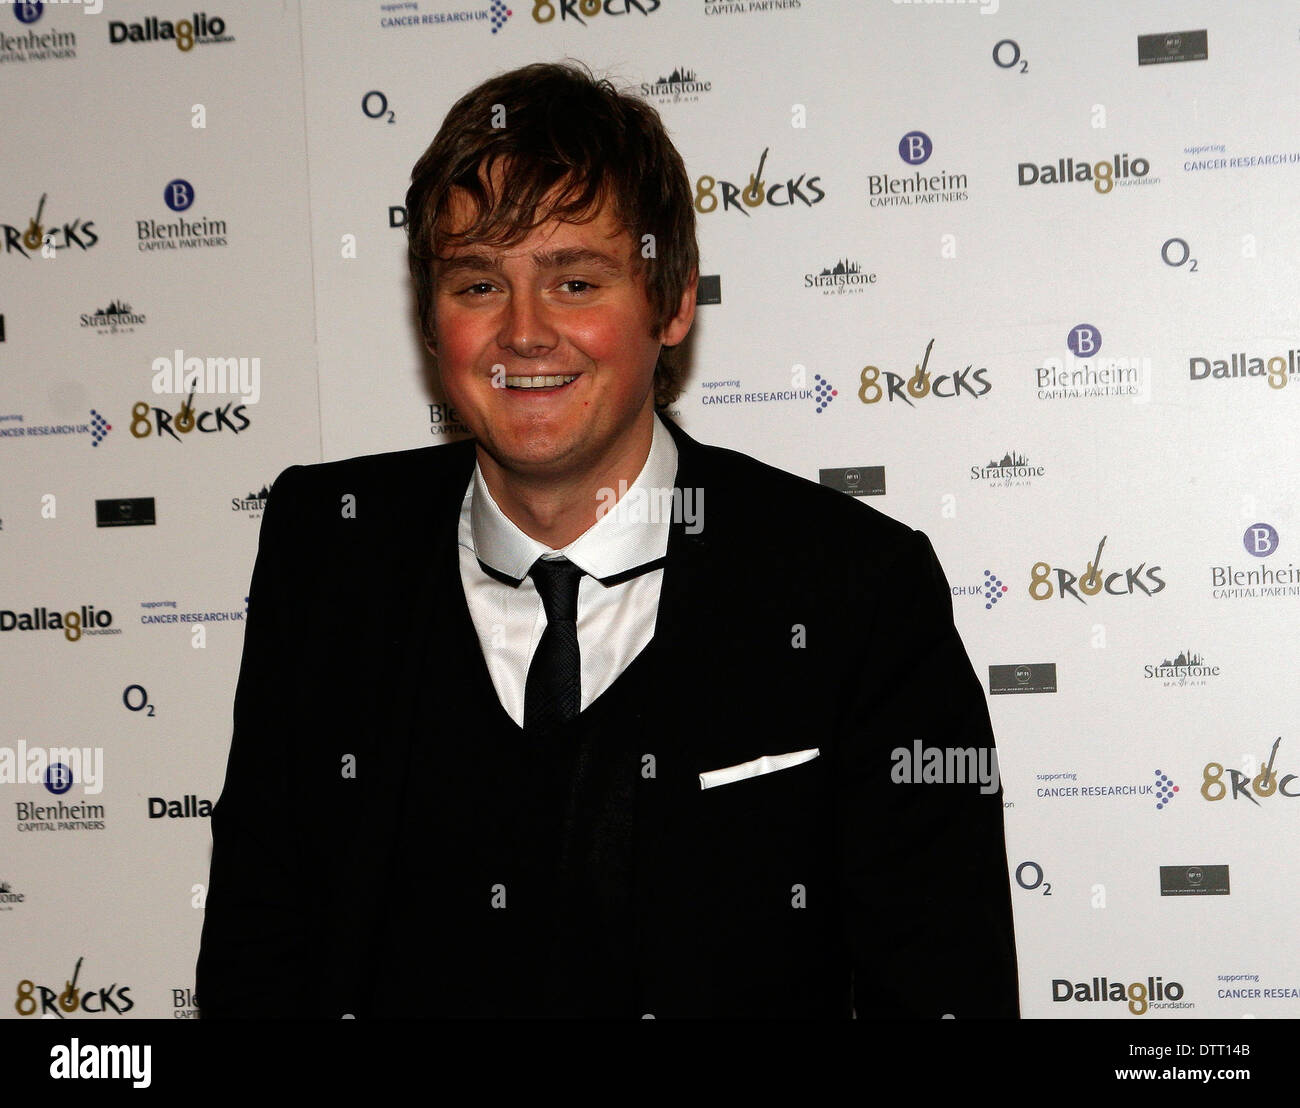 Keene singer Tom Chaplin attending the Cancer Research Charity event in London Stock Photo